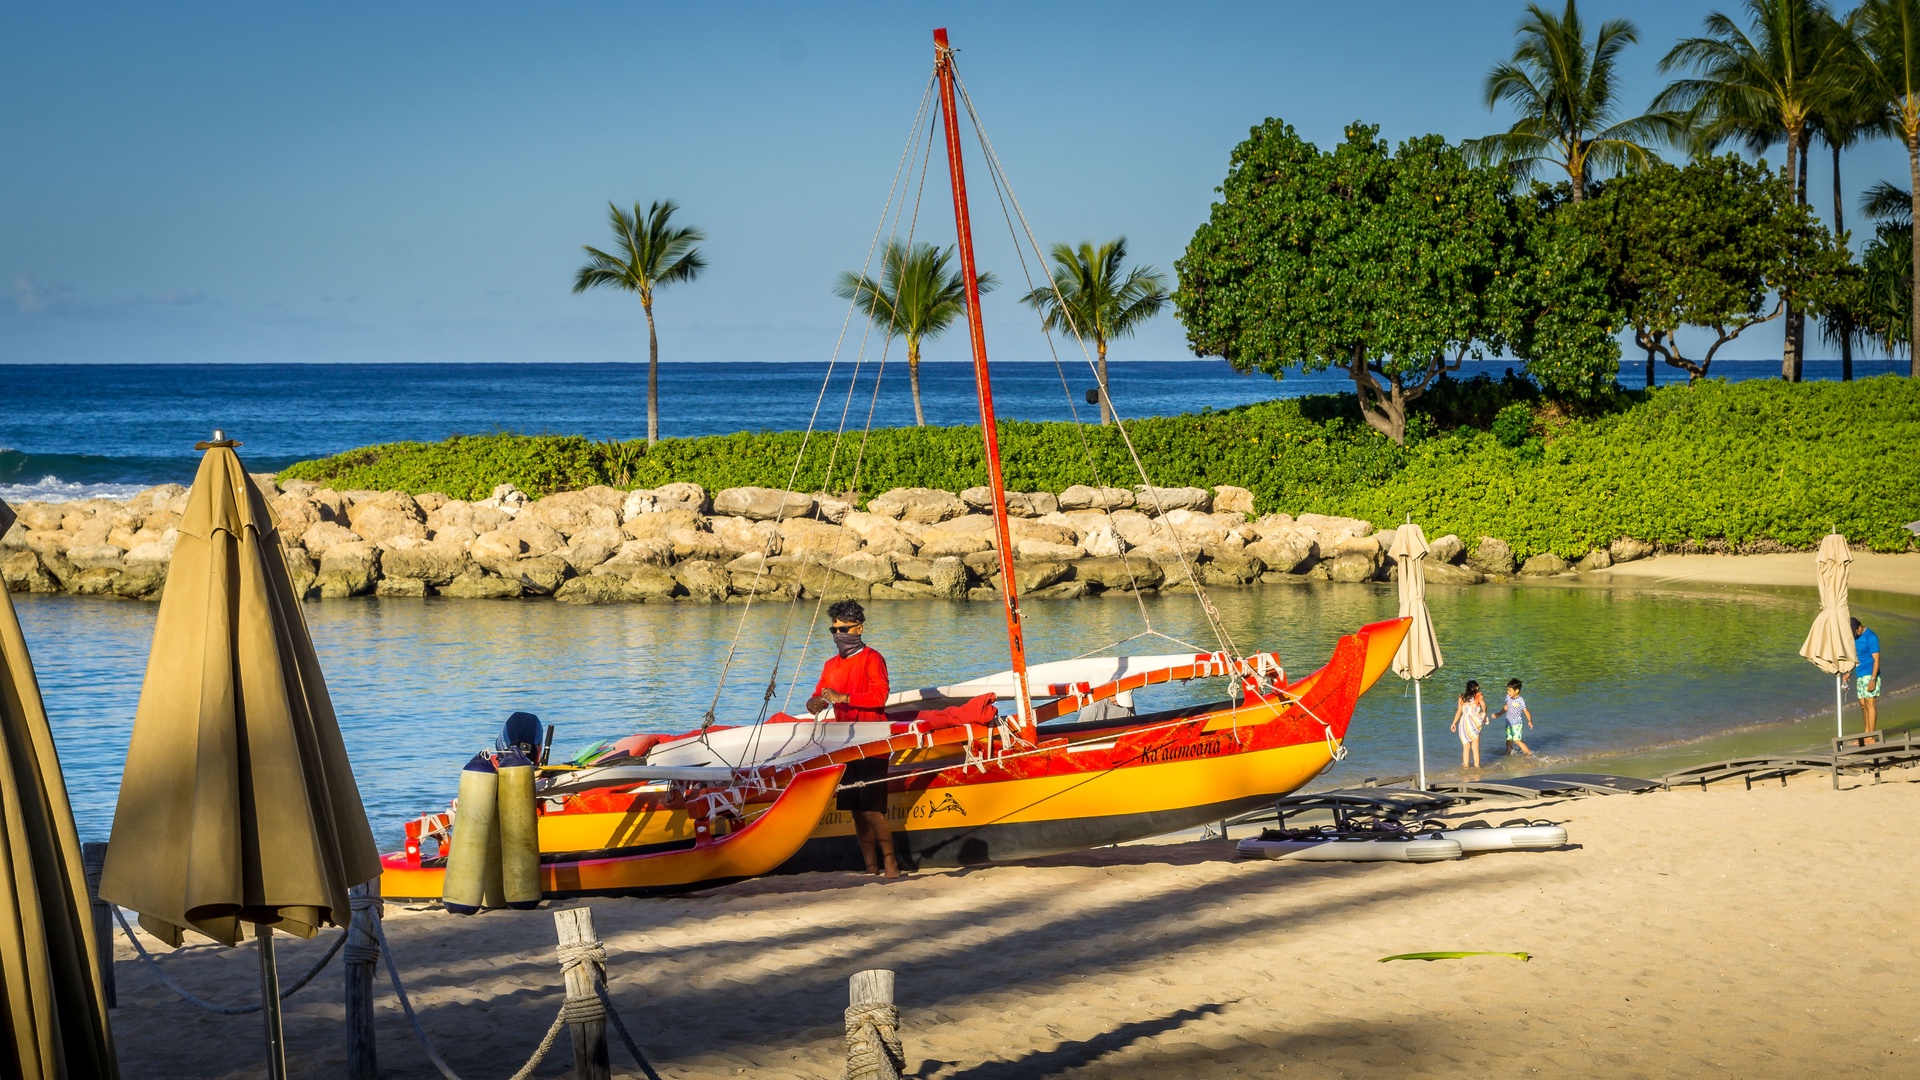 Kapolei Vacation Rentals, Kai Lani 16C - Boating on the island is a favorite escape.